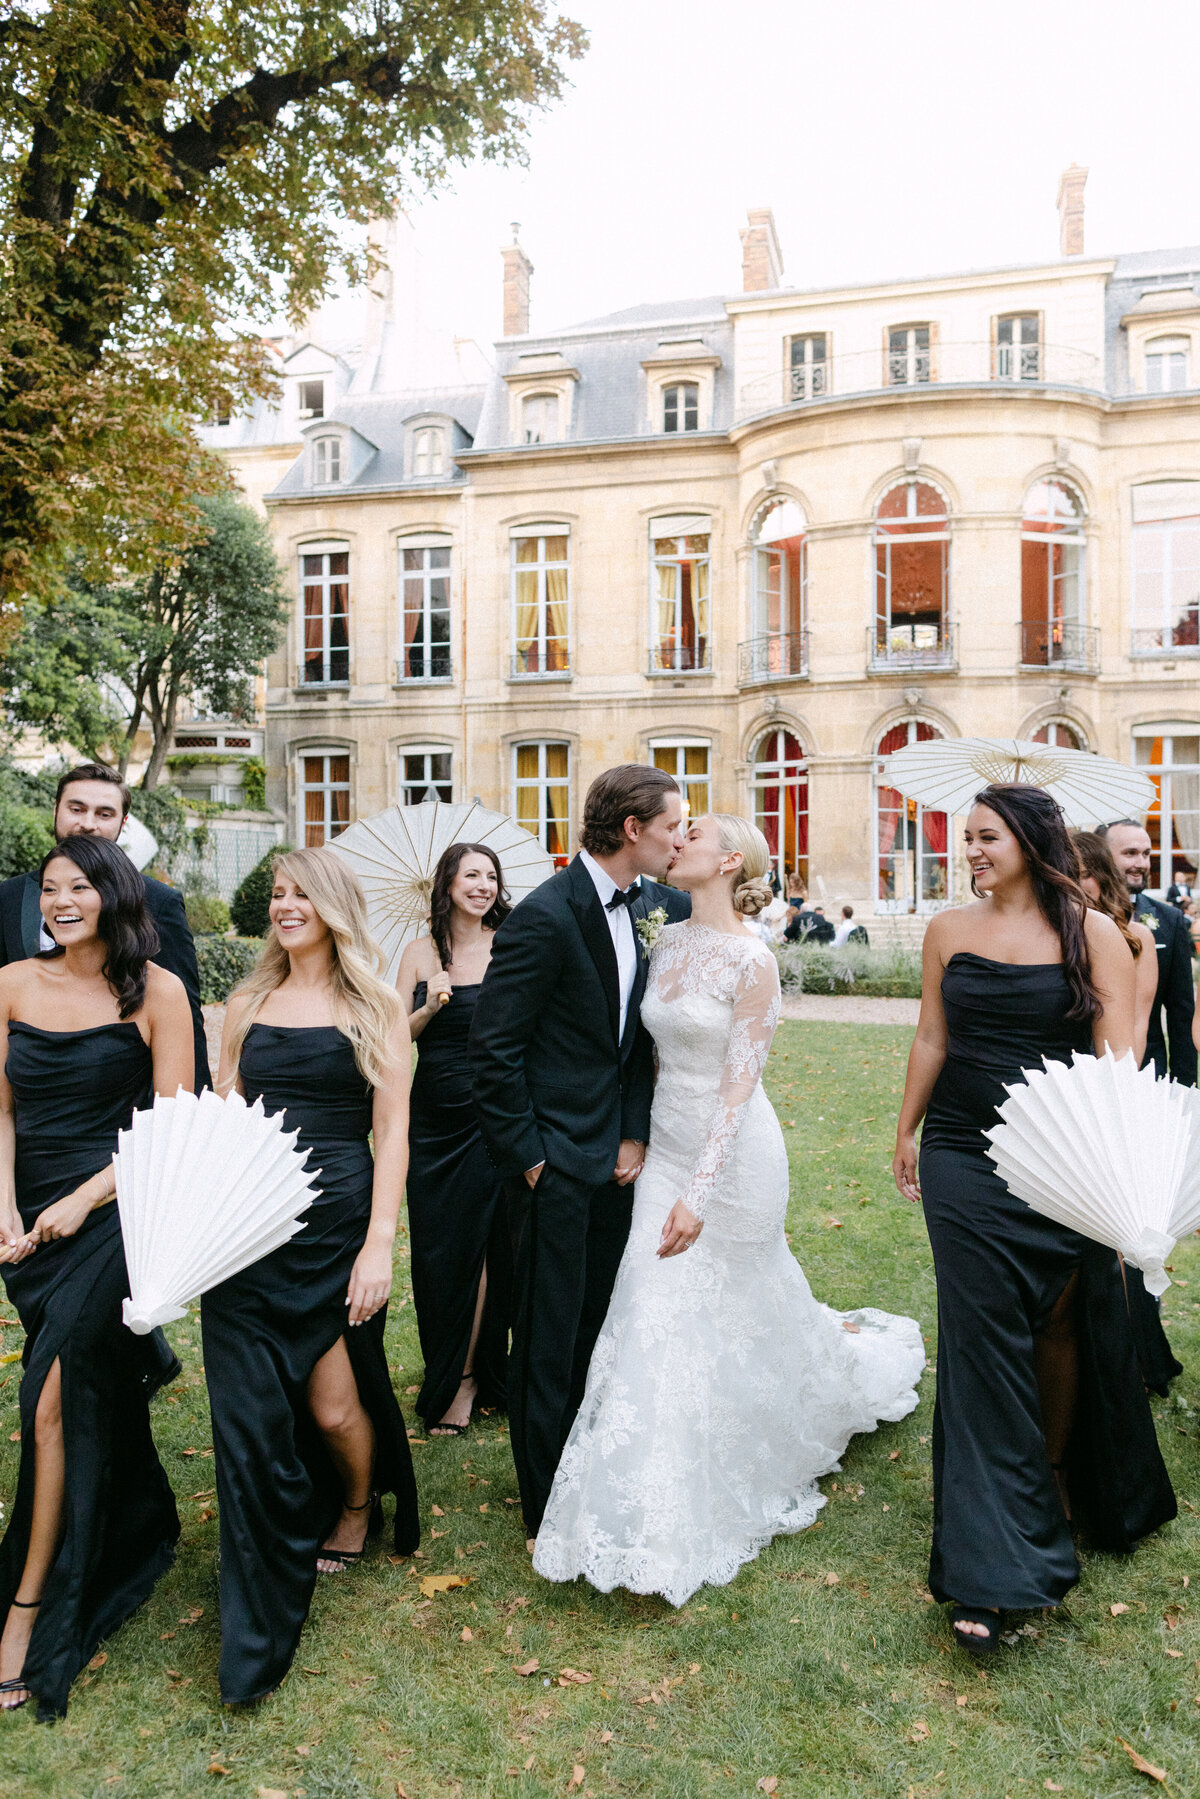 Jennifer Fox Weddings English speaking wedding planning & design agency in France crafting refined and bespoke weddings and celebrations Provence, Paris and destination wd656